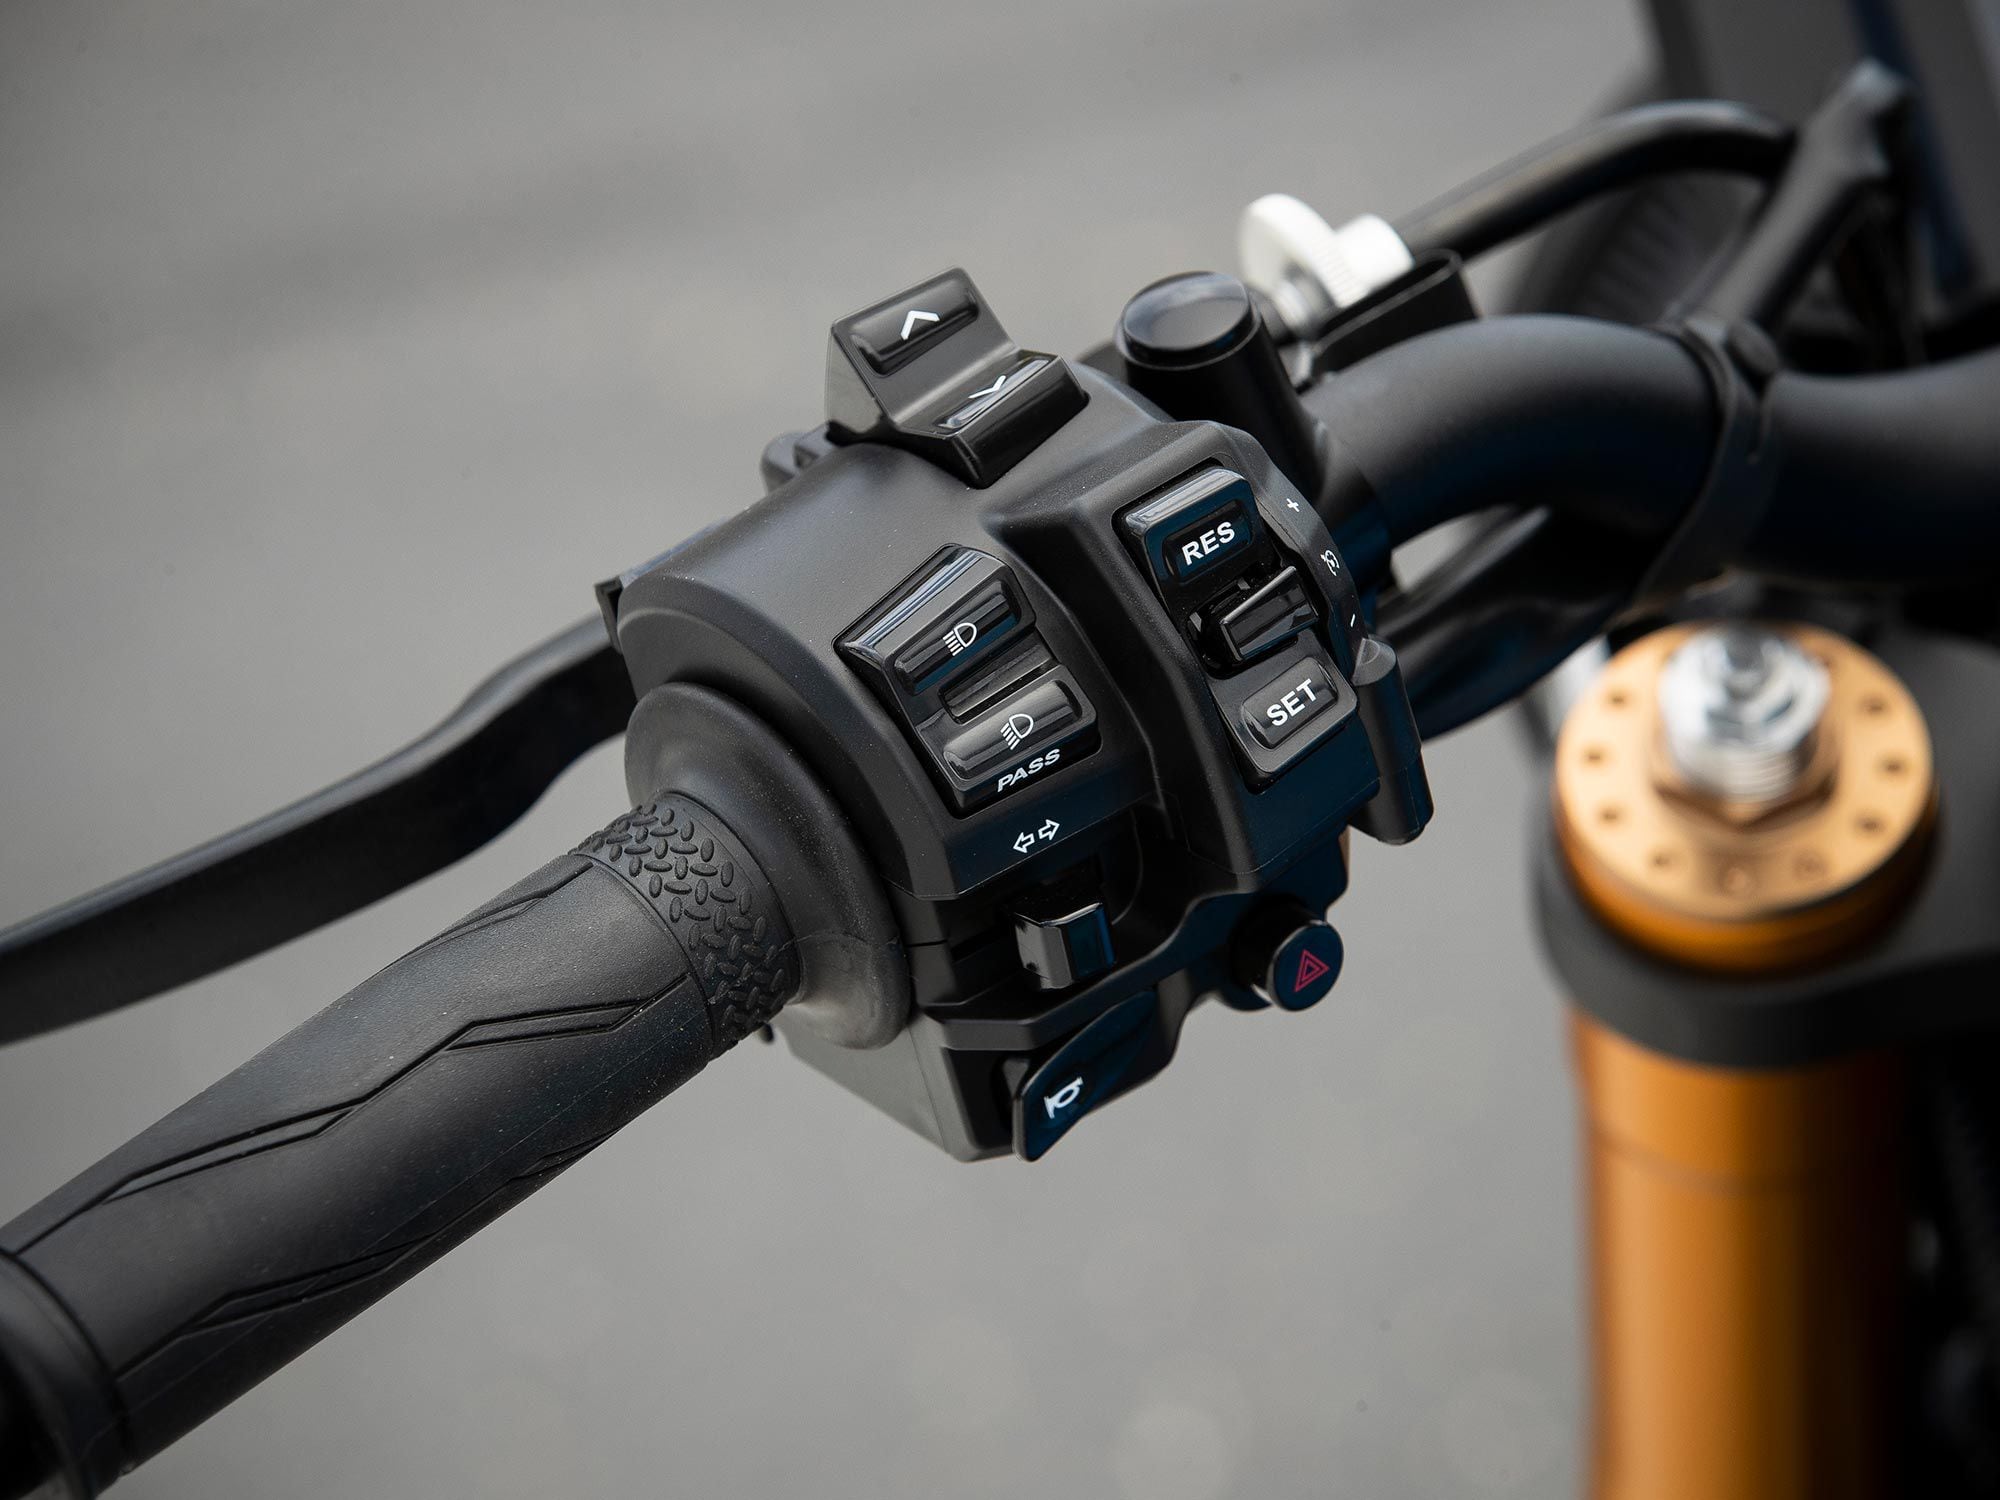 A collection of switches make it easy to manage ride modes, rider-aid settings, and cruise control.